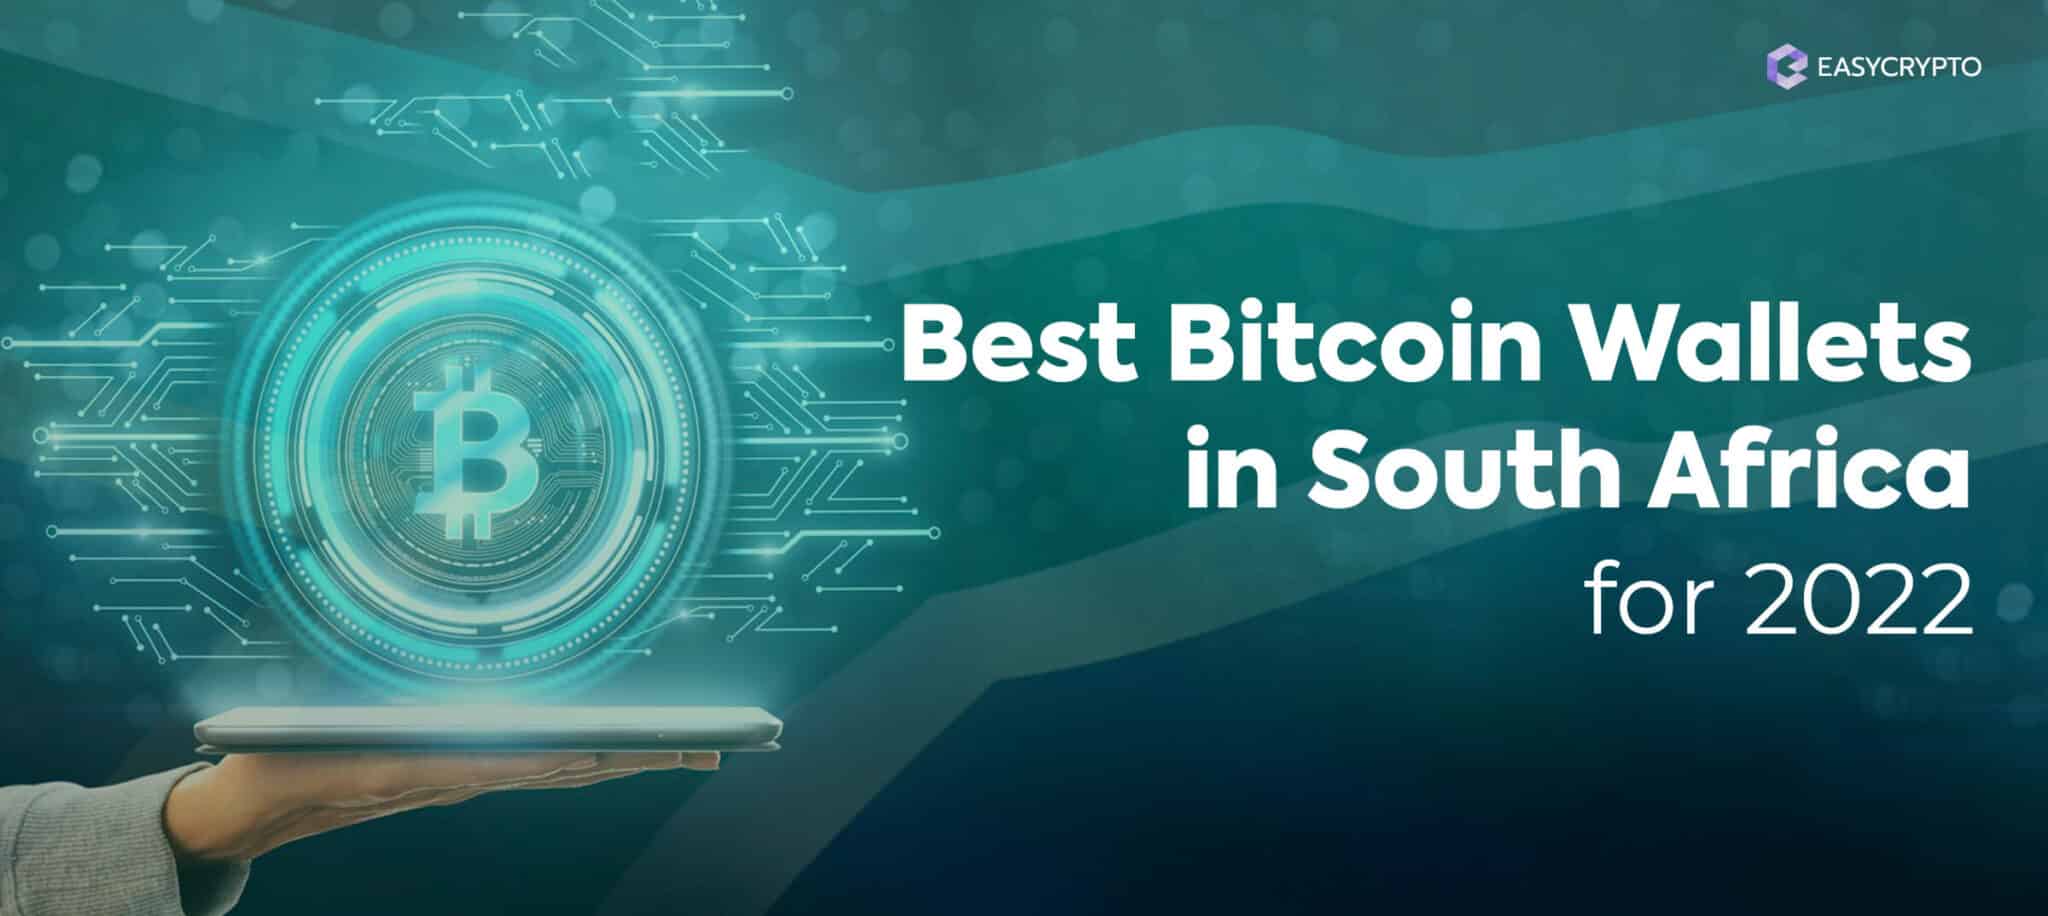 buy bitcoin wallet south africa